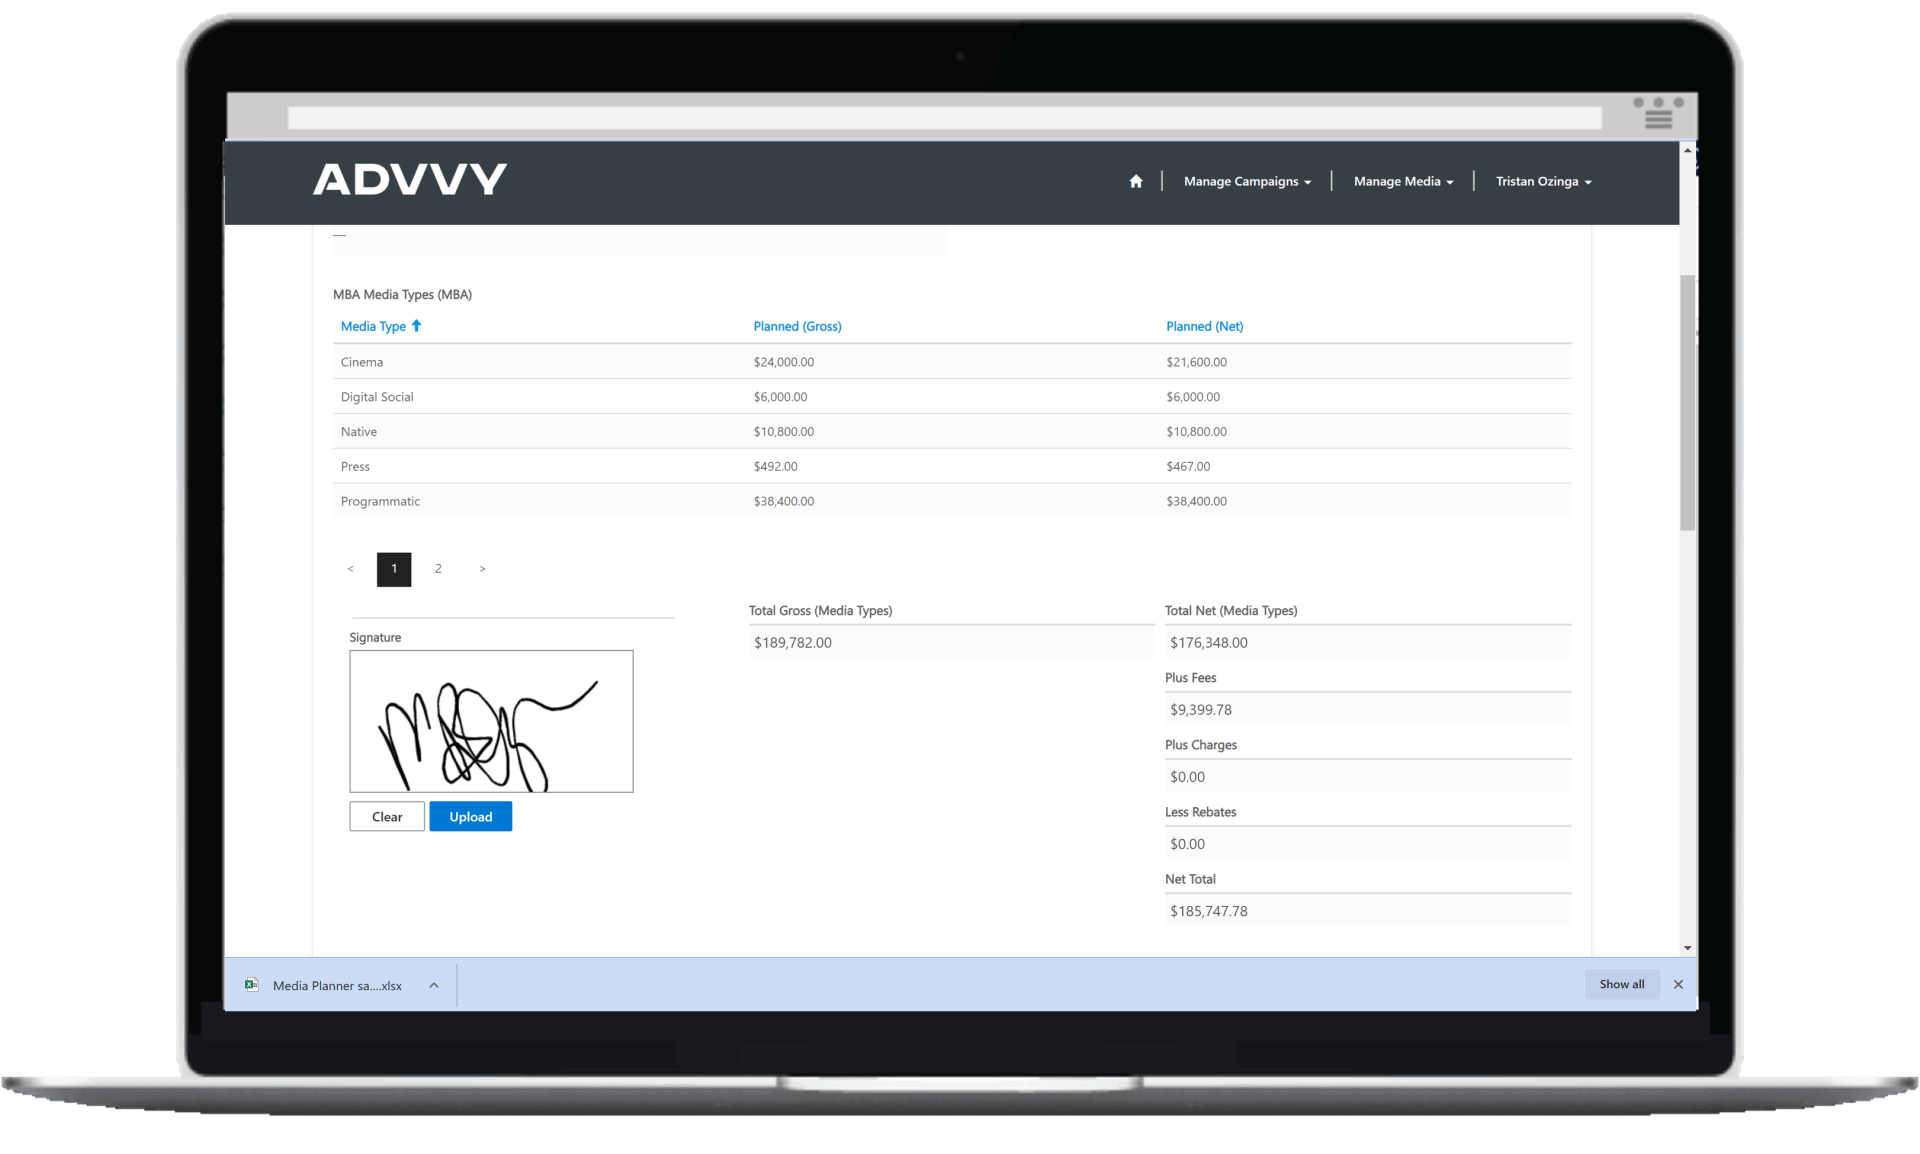 Advvy client portal with authorisation